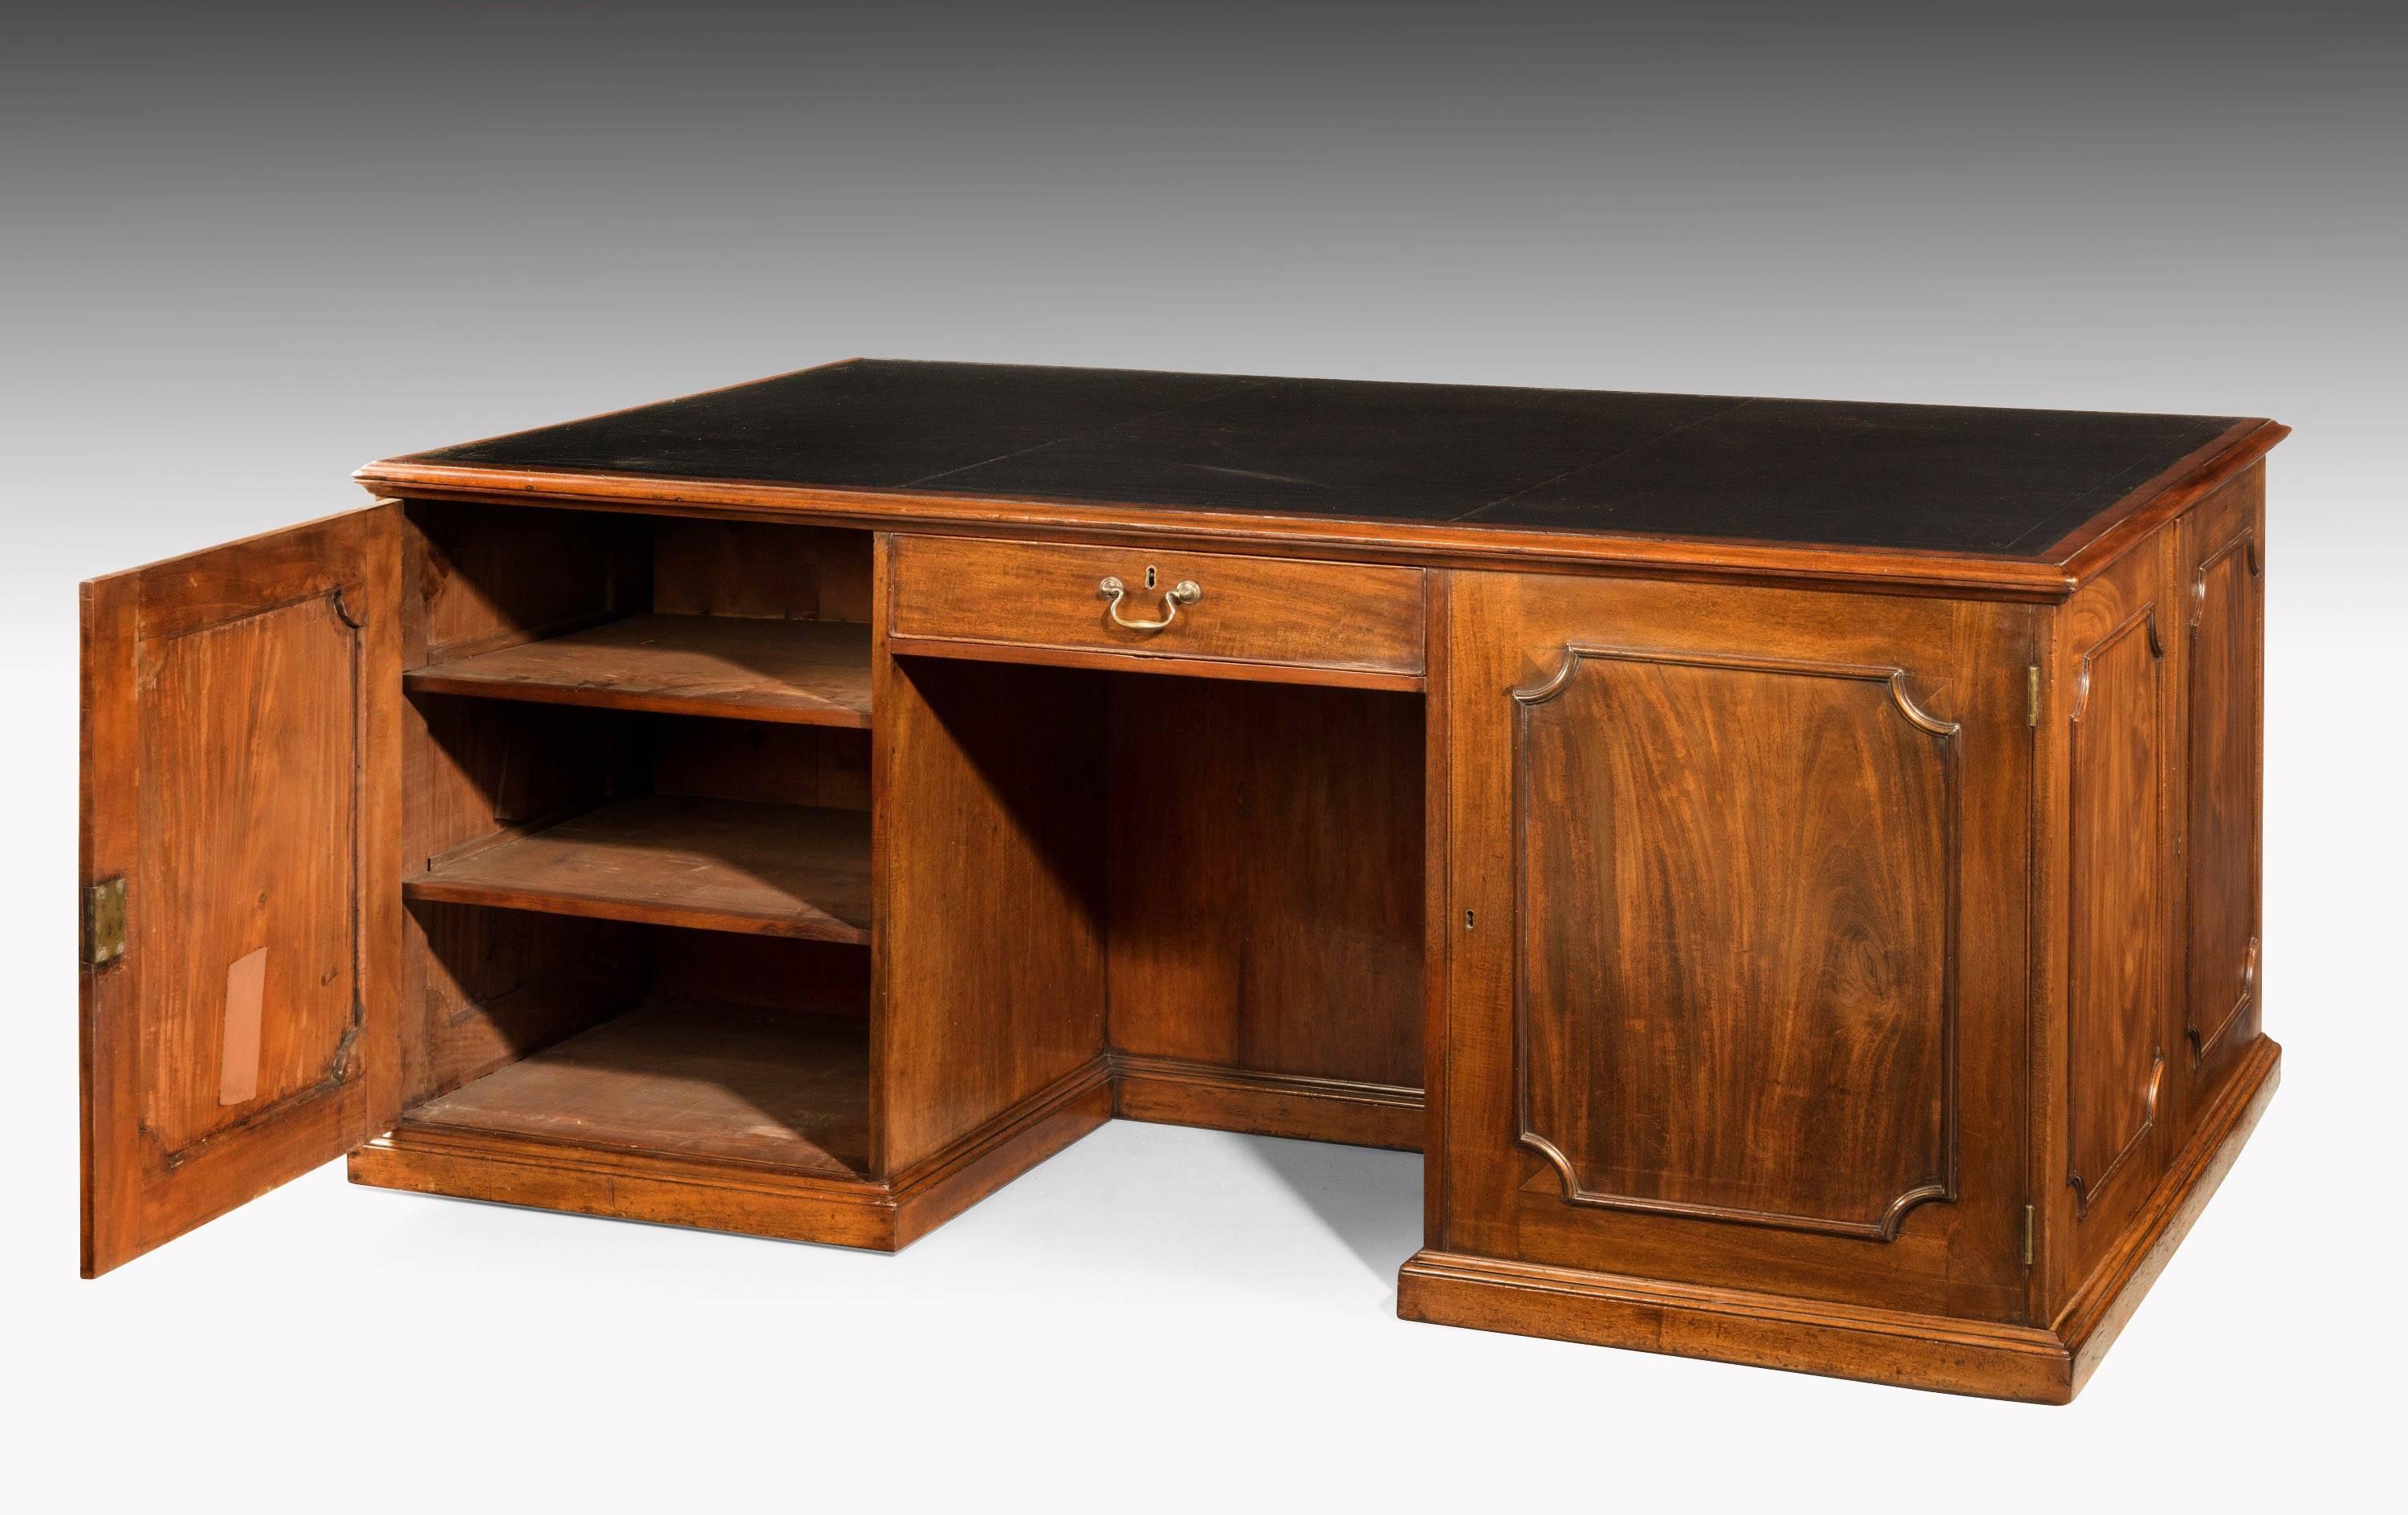 Chippendale Period Mahogany Desk of Unusual Form with Blind Drawers 1